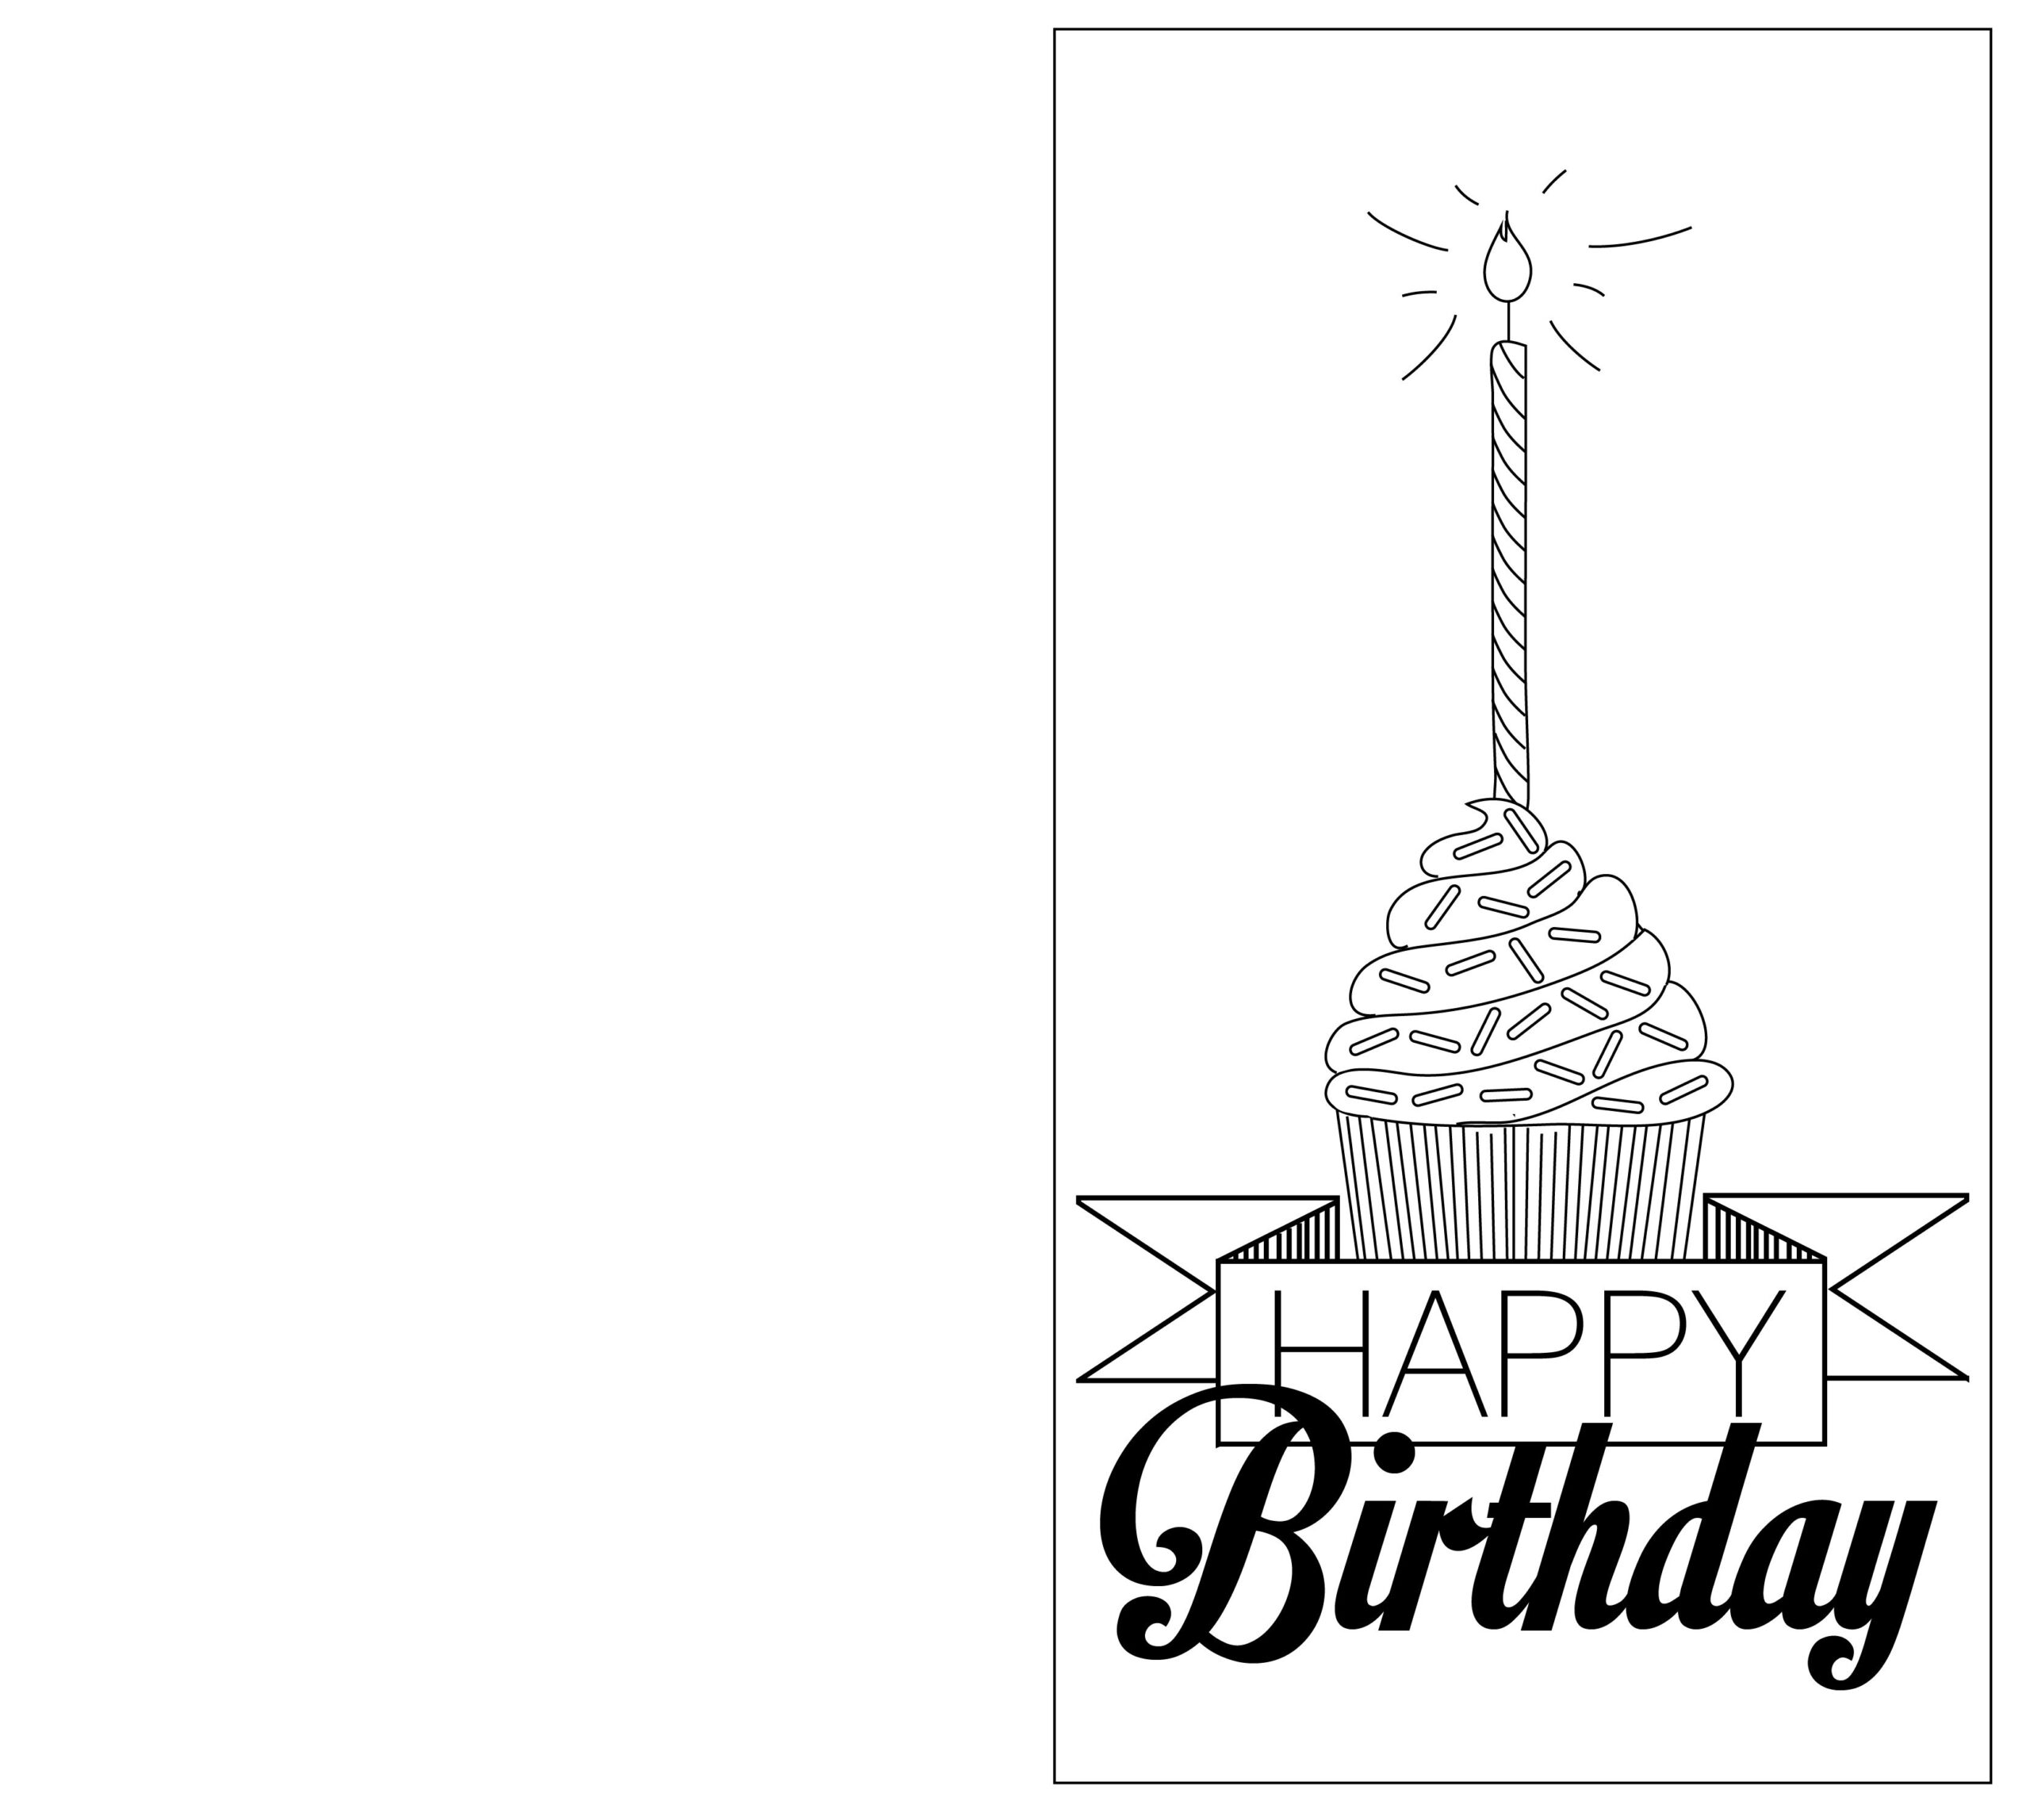 Print Out Black And White Birthday Cards | Birthday Card Throughout Foldable Birthday Card Template